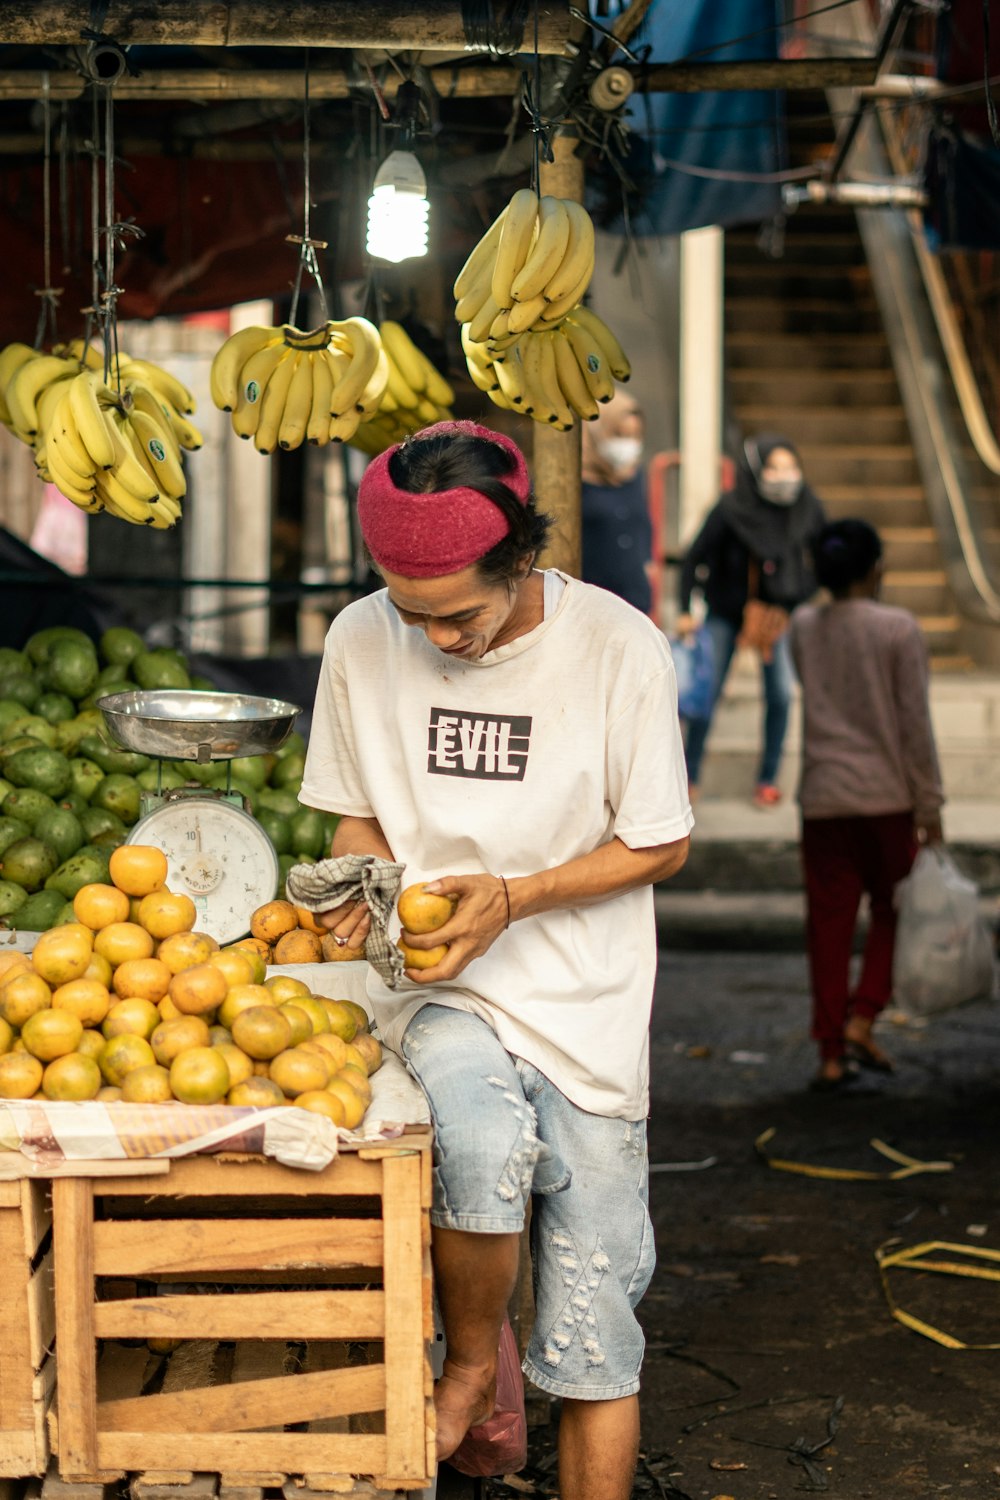 man in white shirt and red knit cap holding yellow banana fruit